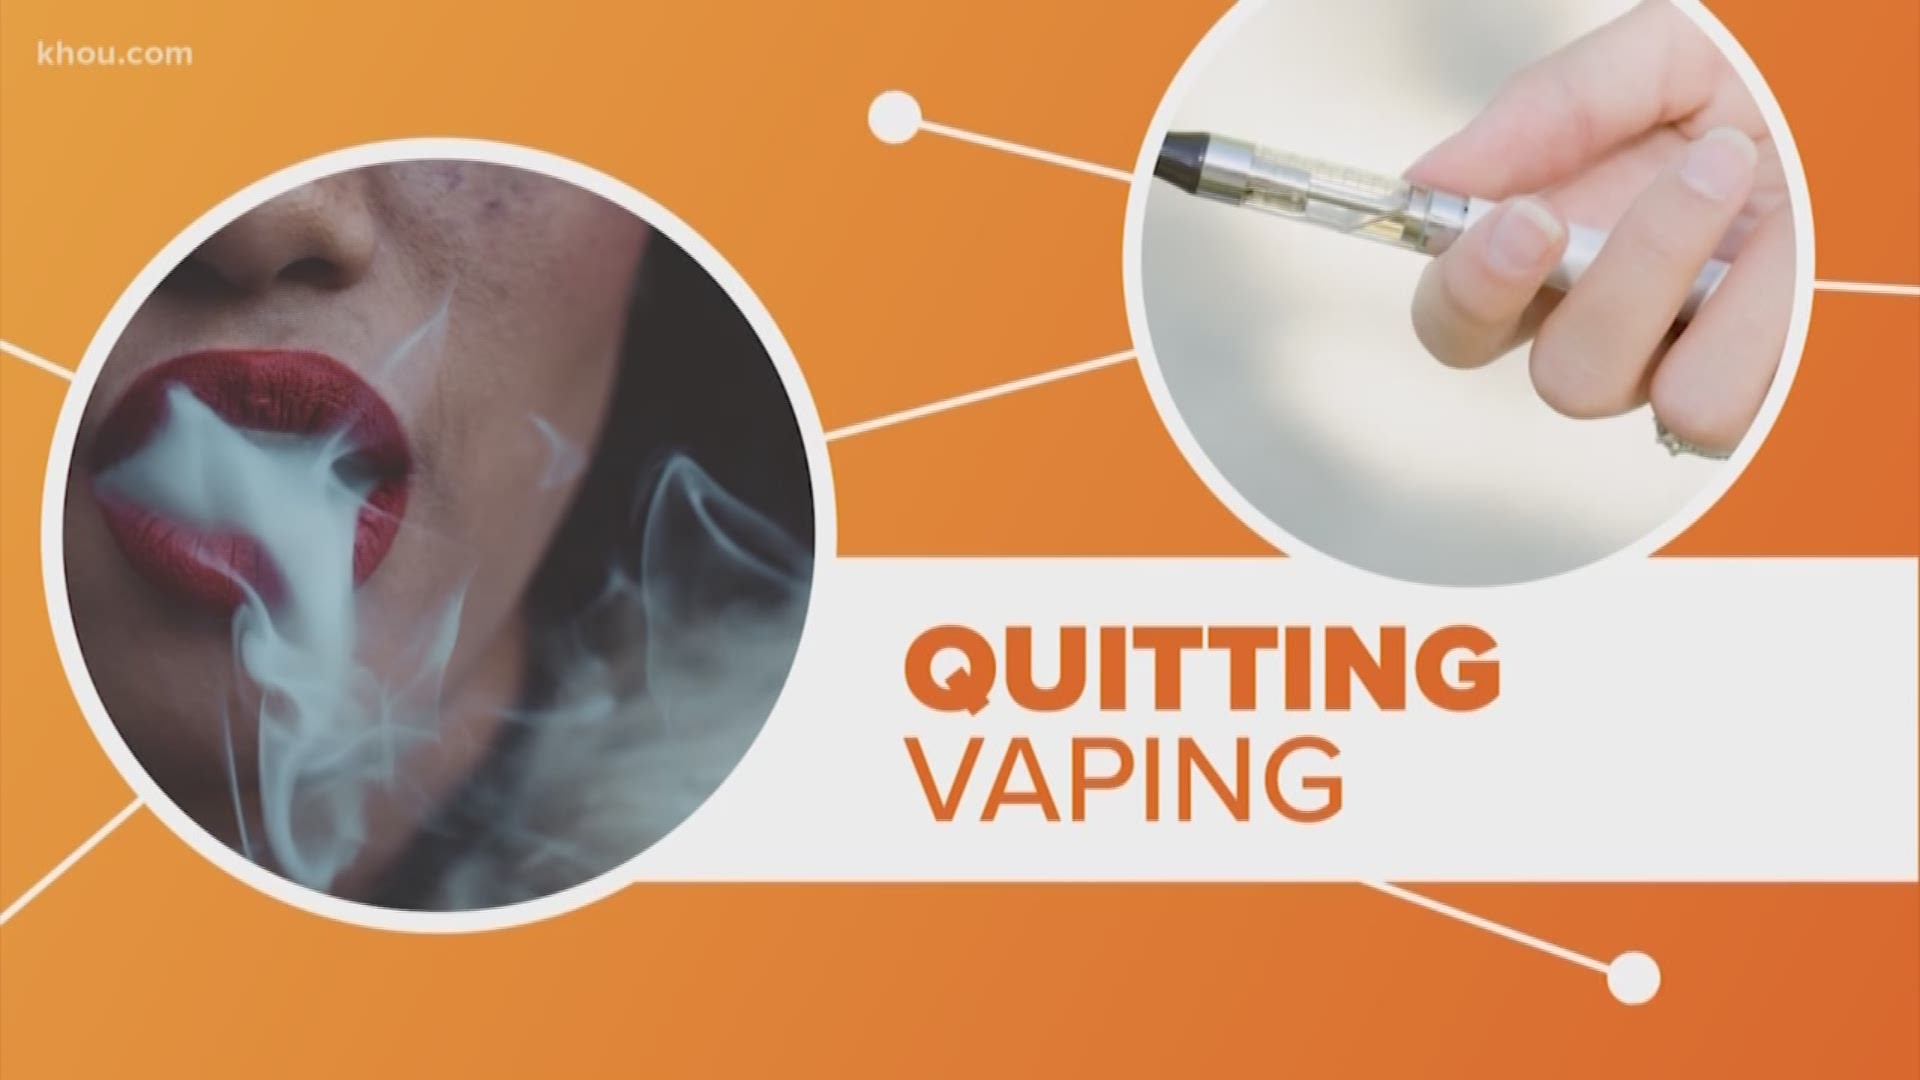 With the illnesses and deaths linked to vaping, many users are ready to call it quits. It's not that easy, though.